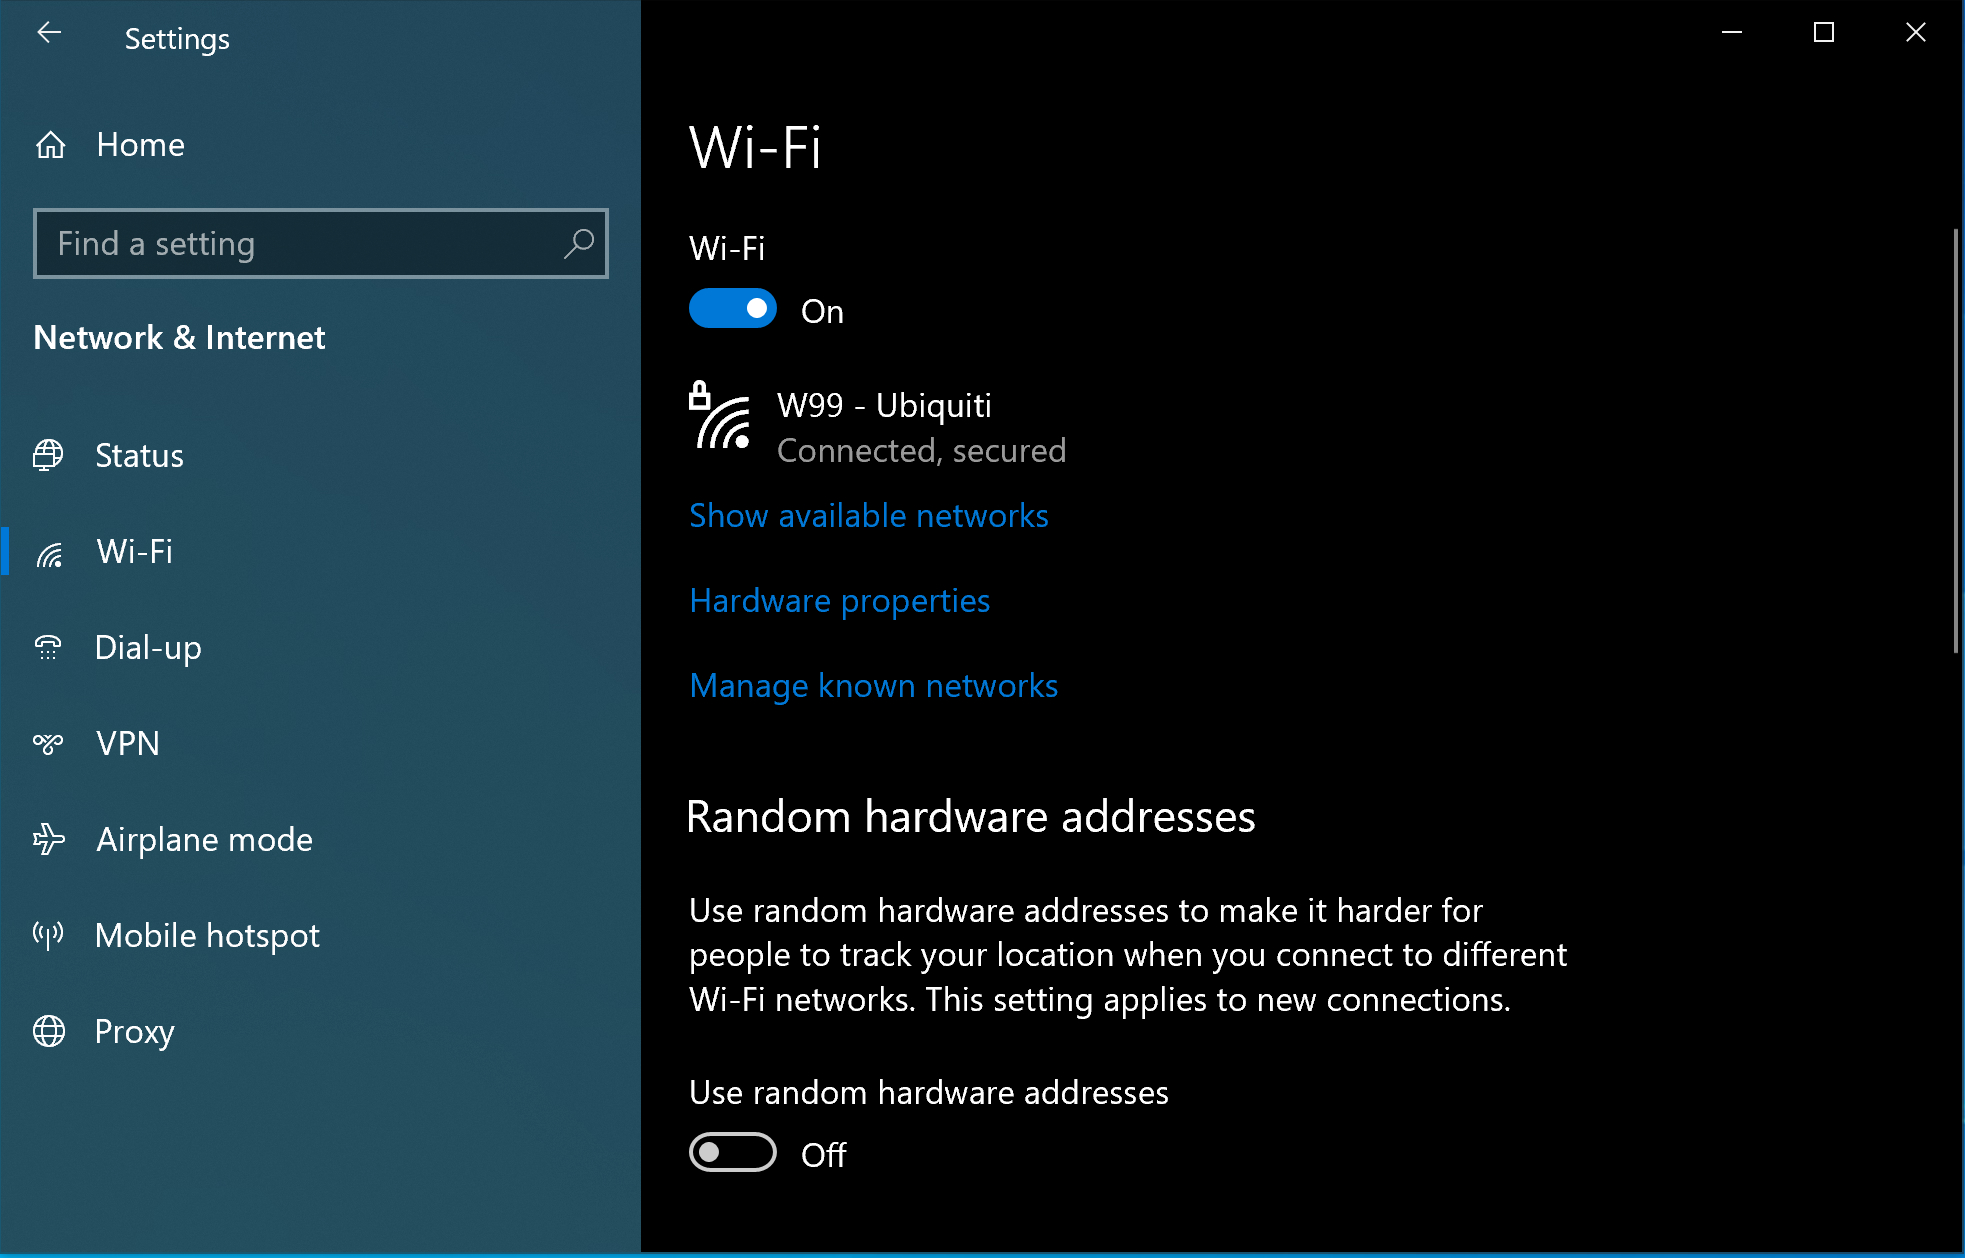 Disable dynamic MAC address by toggling 'OFF' random hardware addresses in Windows